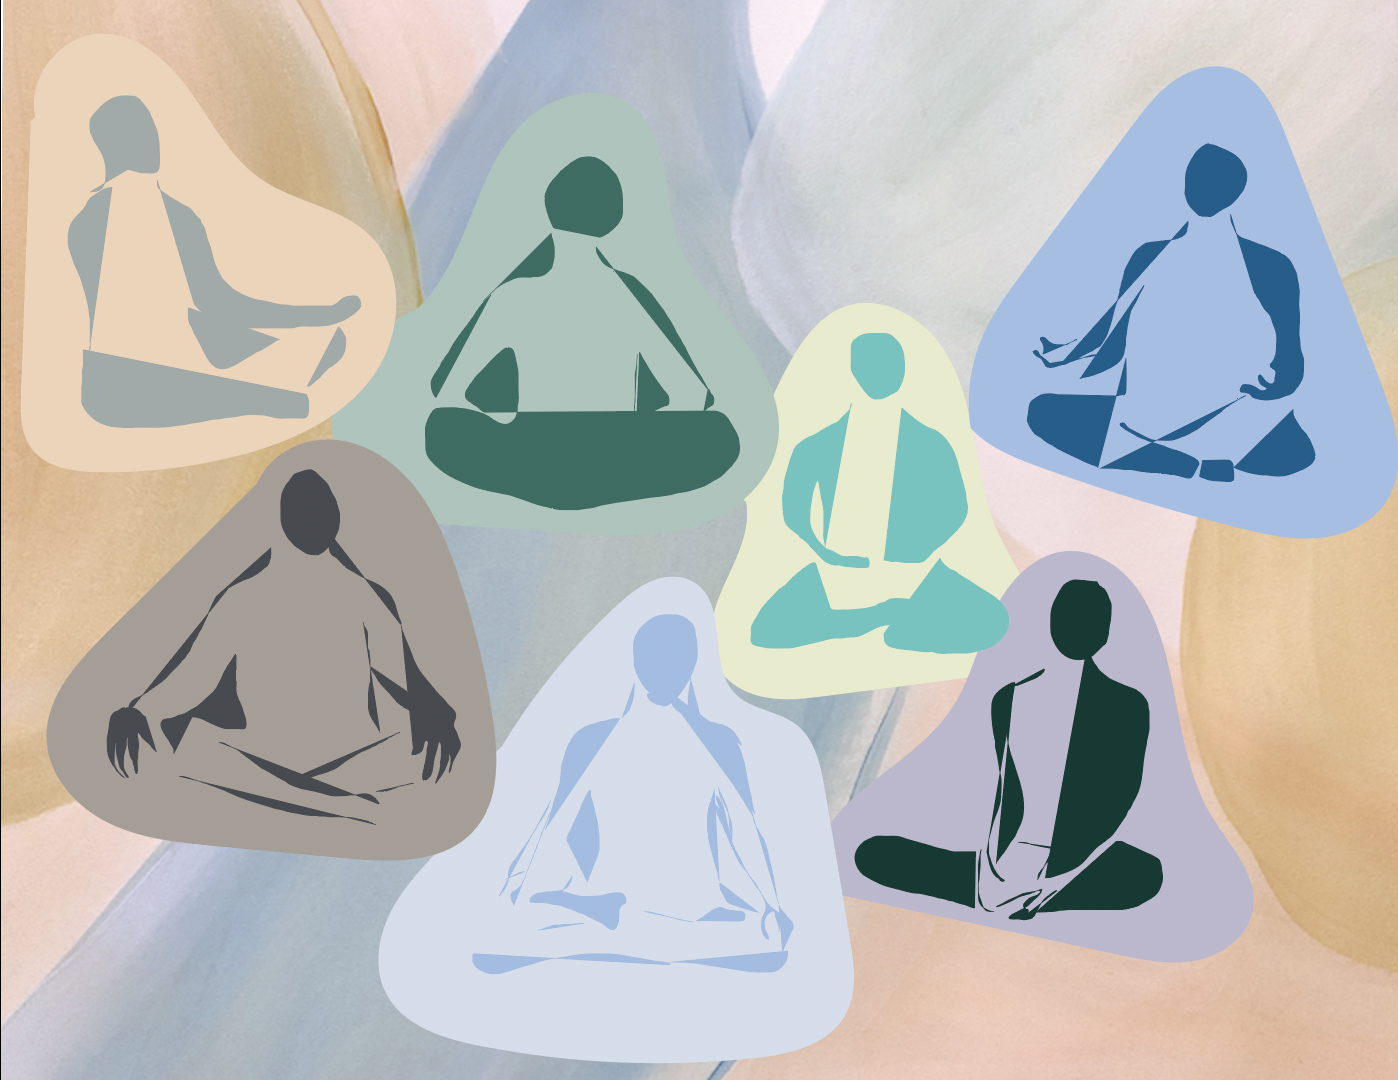 Image is an abstract piece with human figures in yoga poses sitting in different bubble/collage shapes around the image in soft colors.